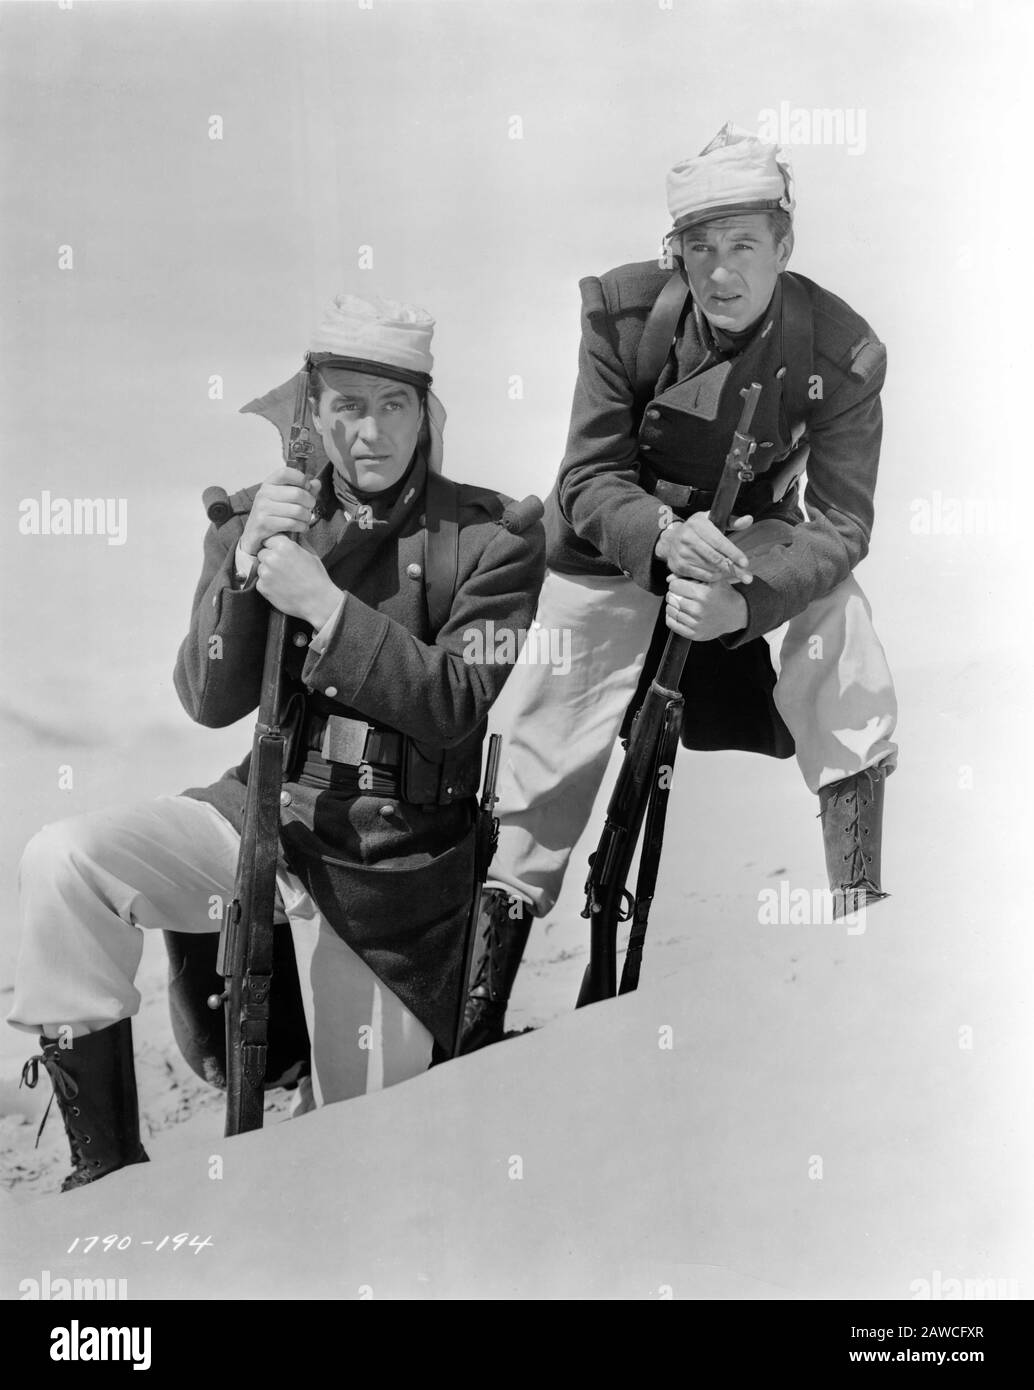 RAY MILLAND as John Geste and GARY COOPER as Beau Geste in BEAU GESTE 1939 director WILLIAM A. WELLMAN novel P.C. WREN Paramount Pictures Corporation Stock Photo